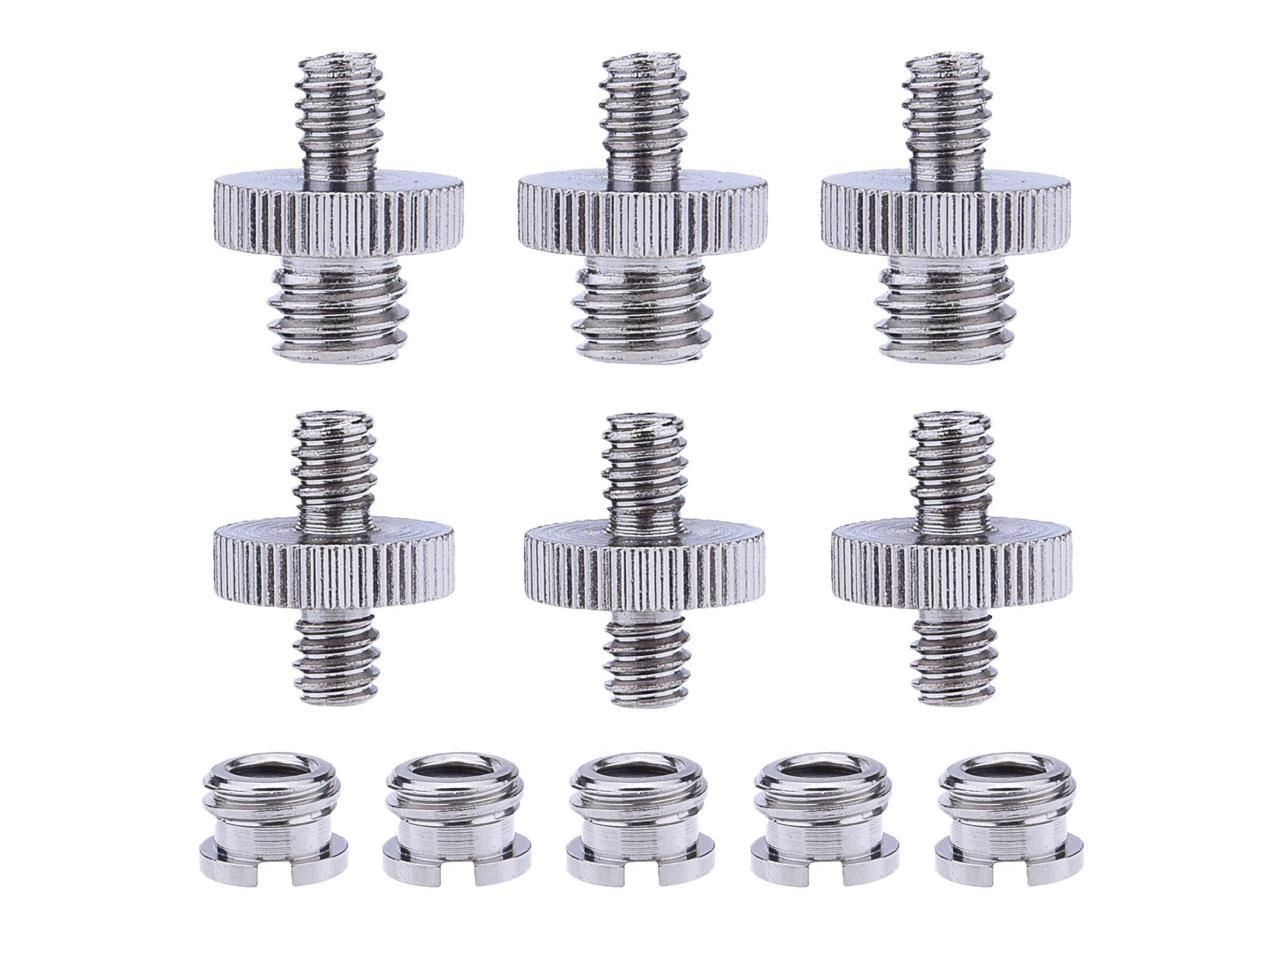 21 Pieces Sunmns 1/4 inch and 3/8 inch Converter Threaded Screws Adapter Mount Set for Camera/Tripod/ Monopod/Ballhead/ Light Stand/Shoulder Rig